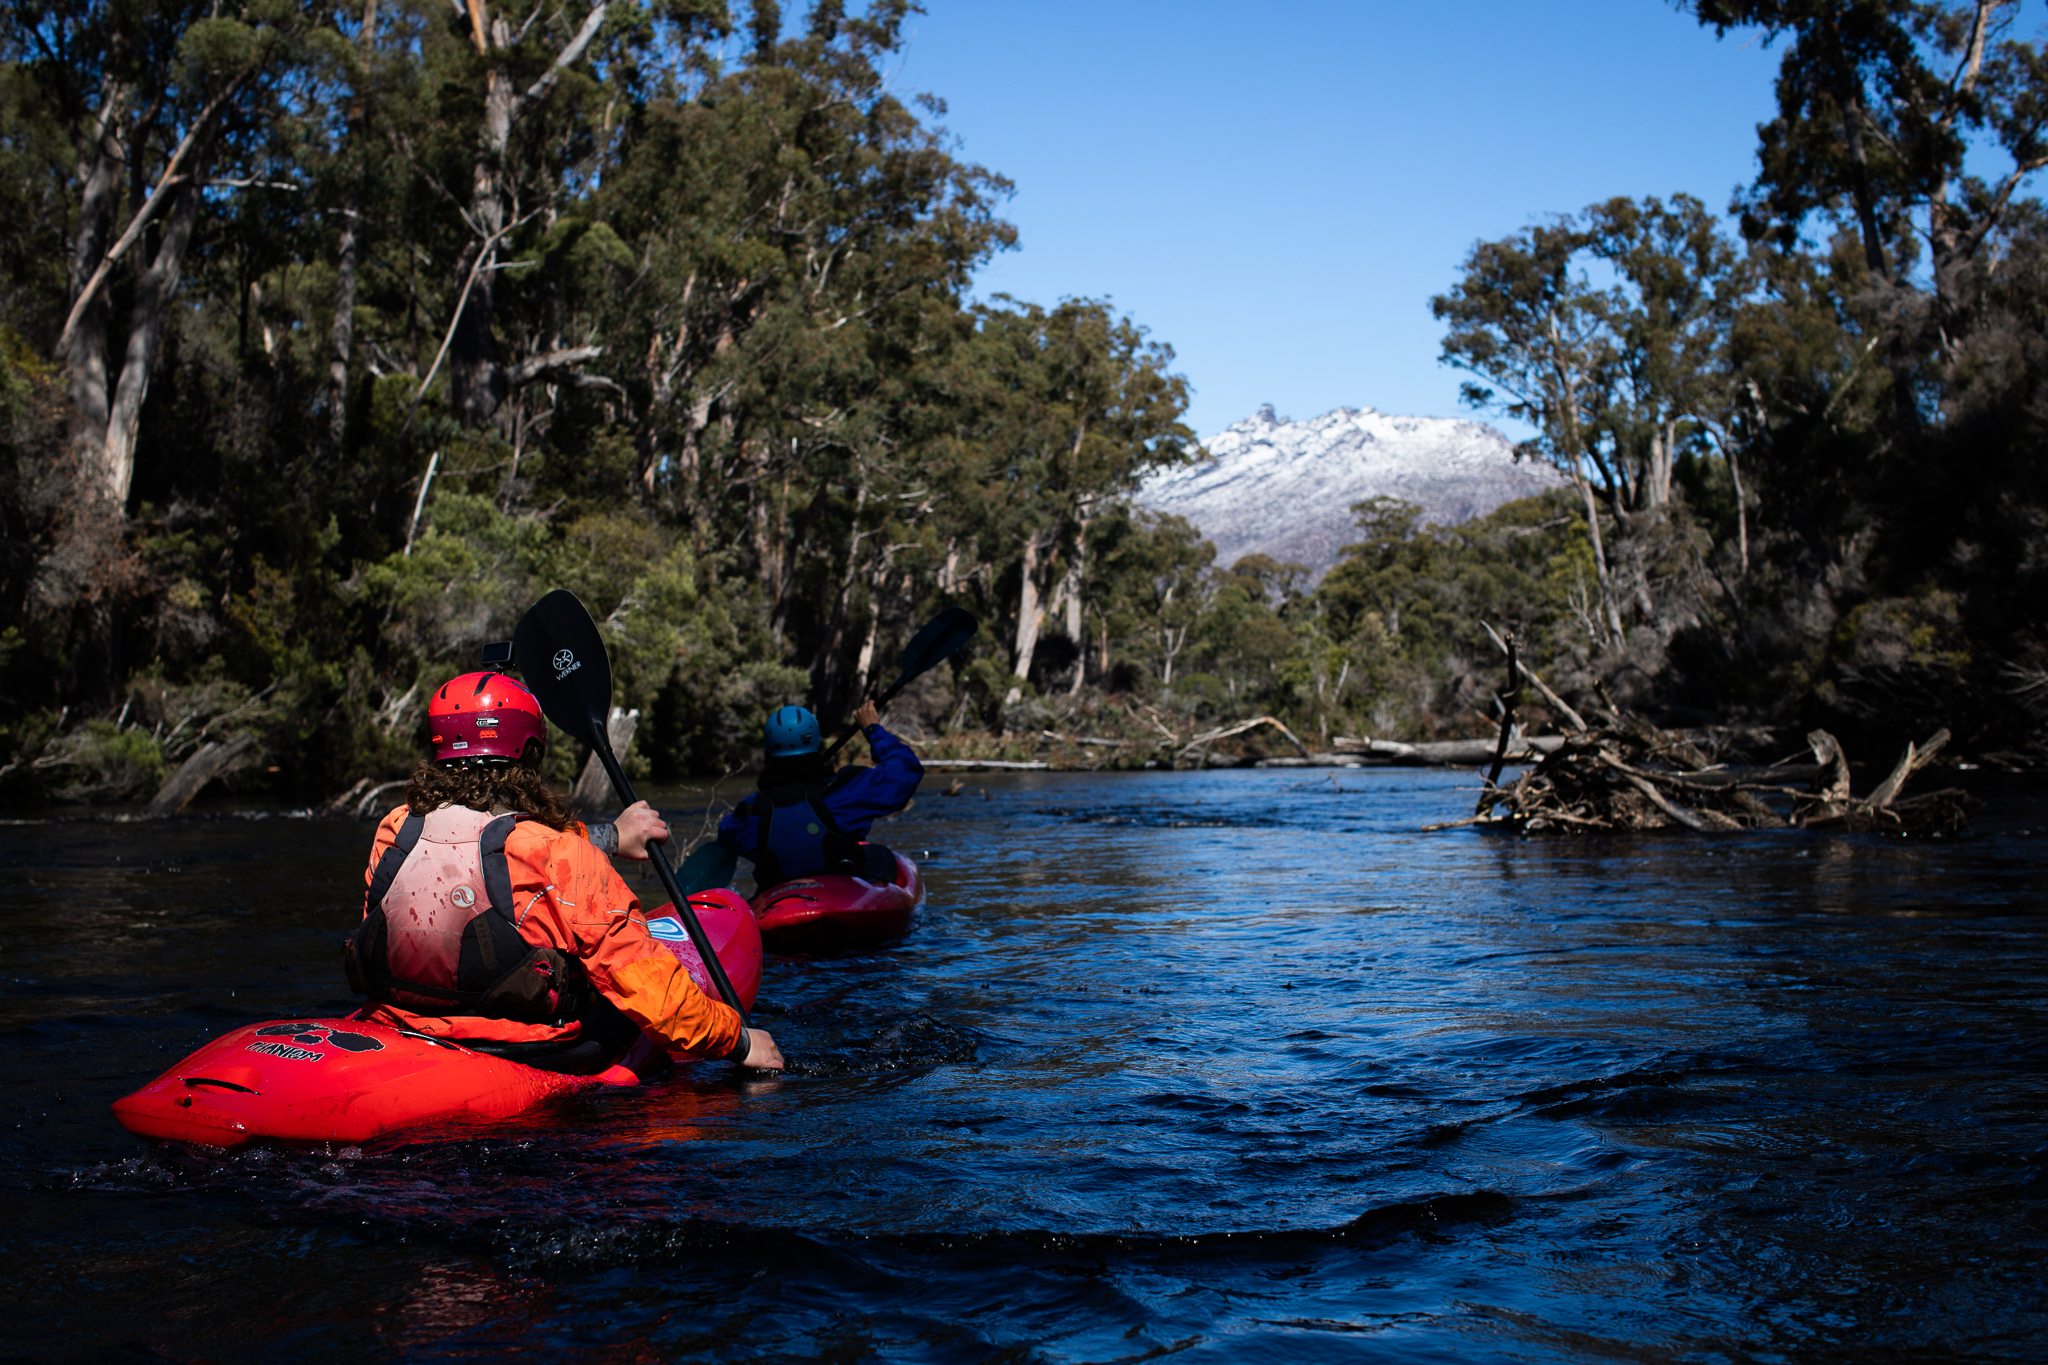 two kayakers paddling away from the camera towards a snowy mountain